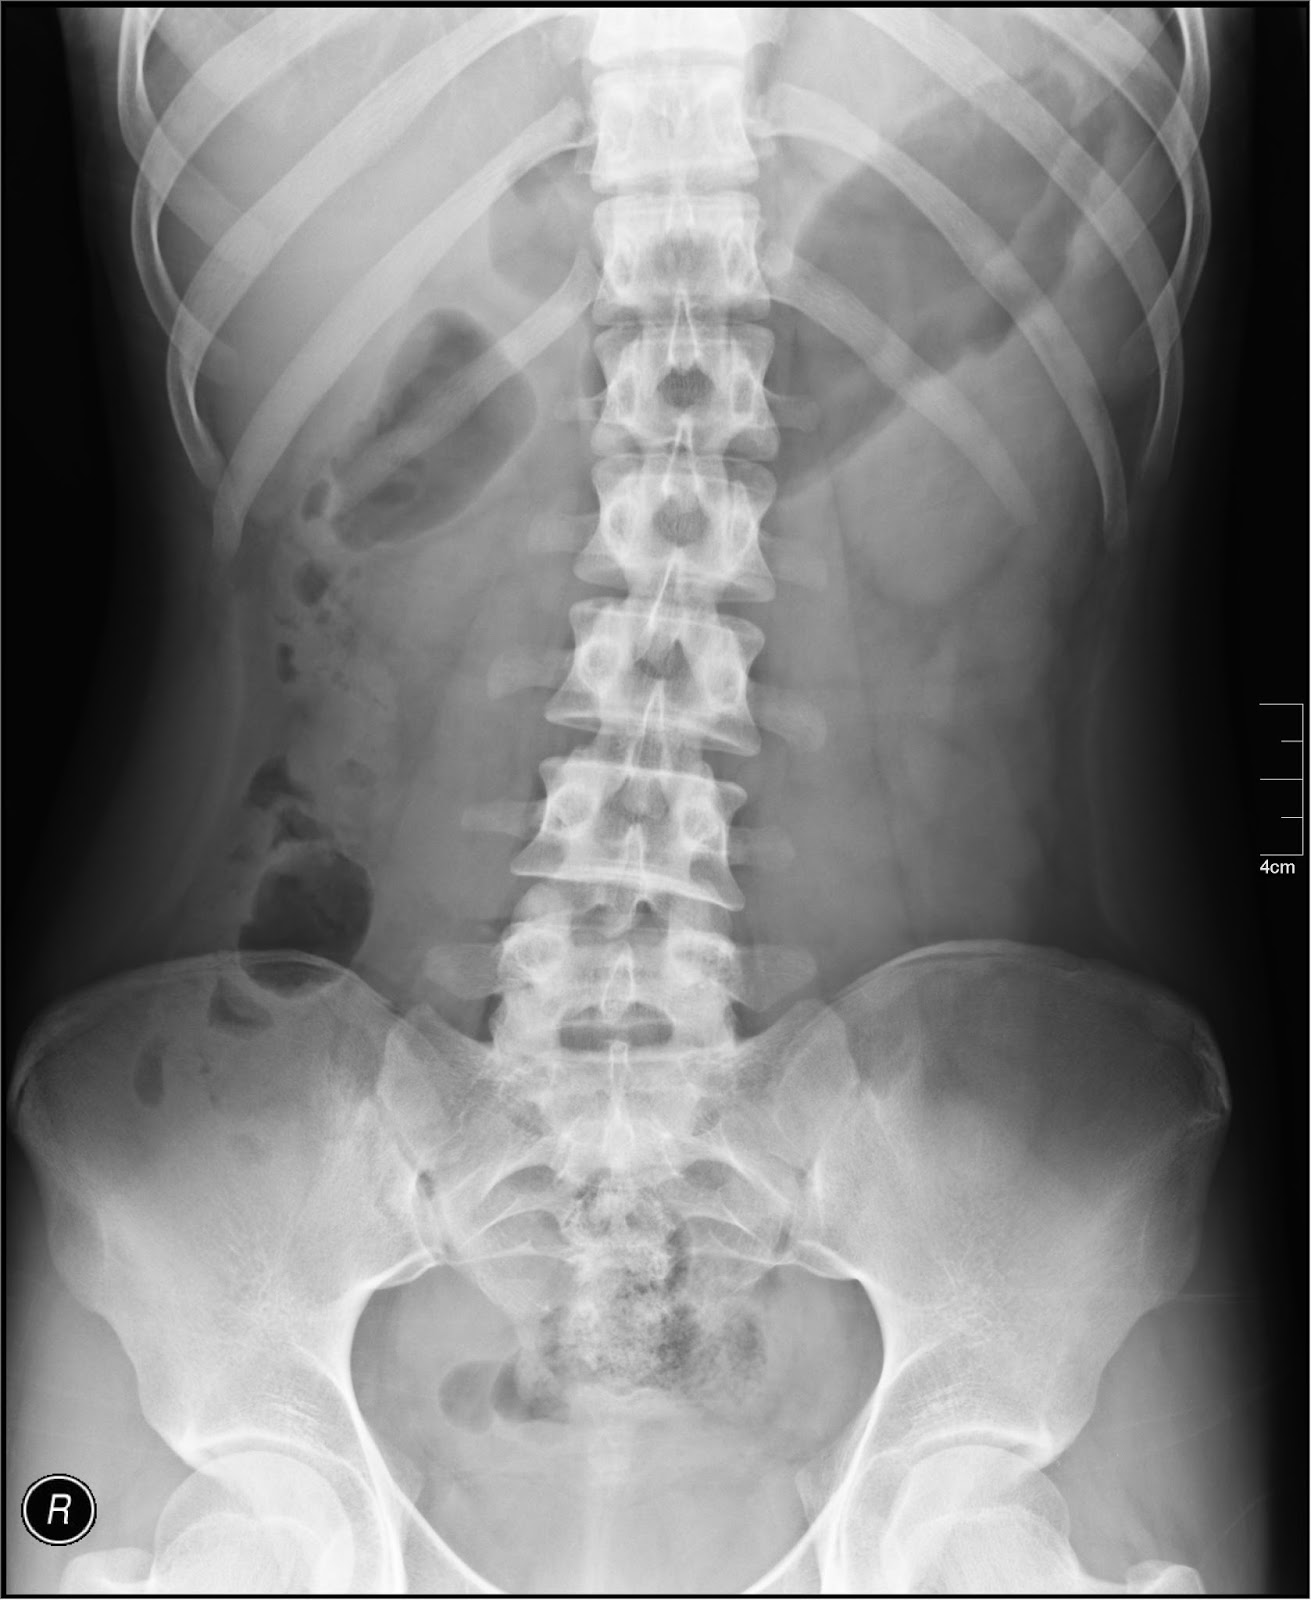 Abdominal X-Rays: What’s the Point?